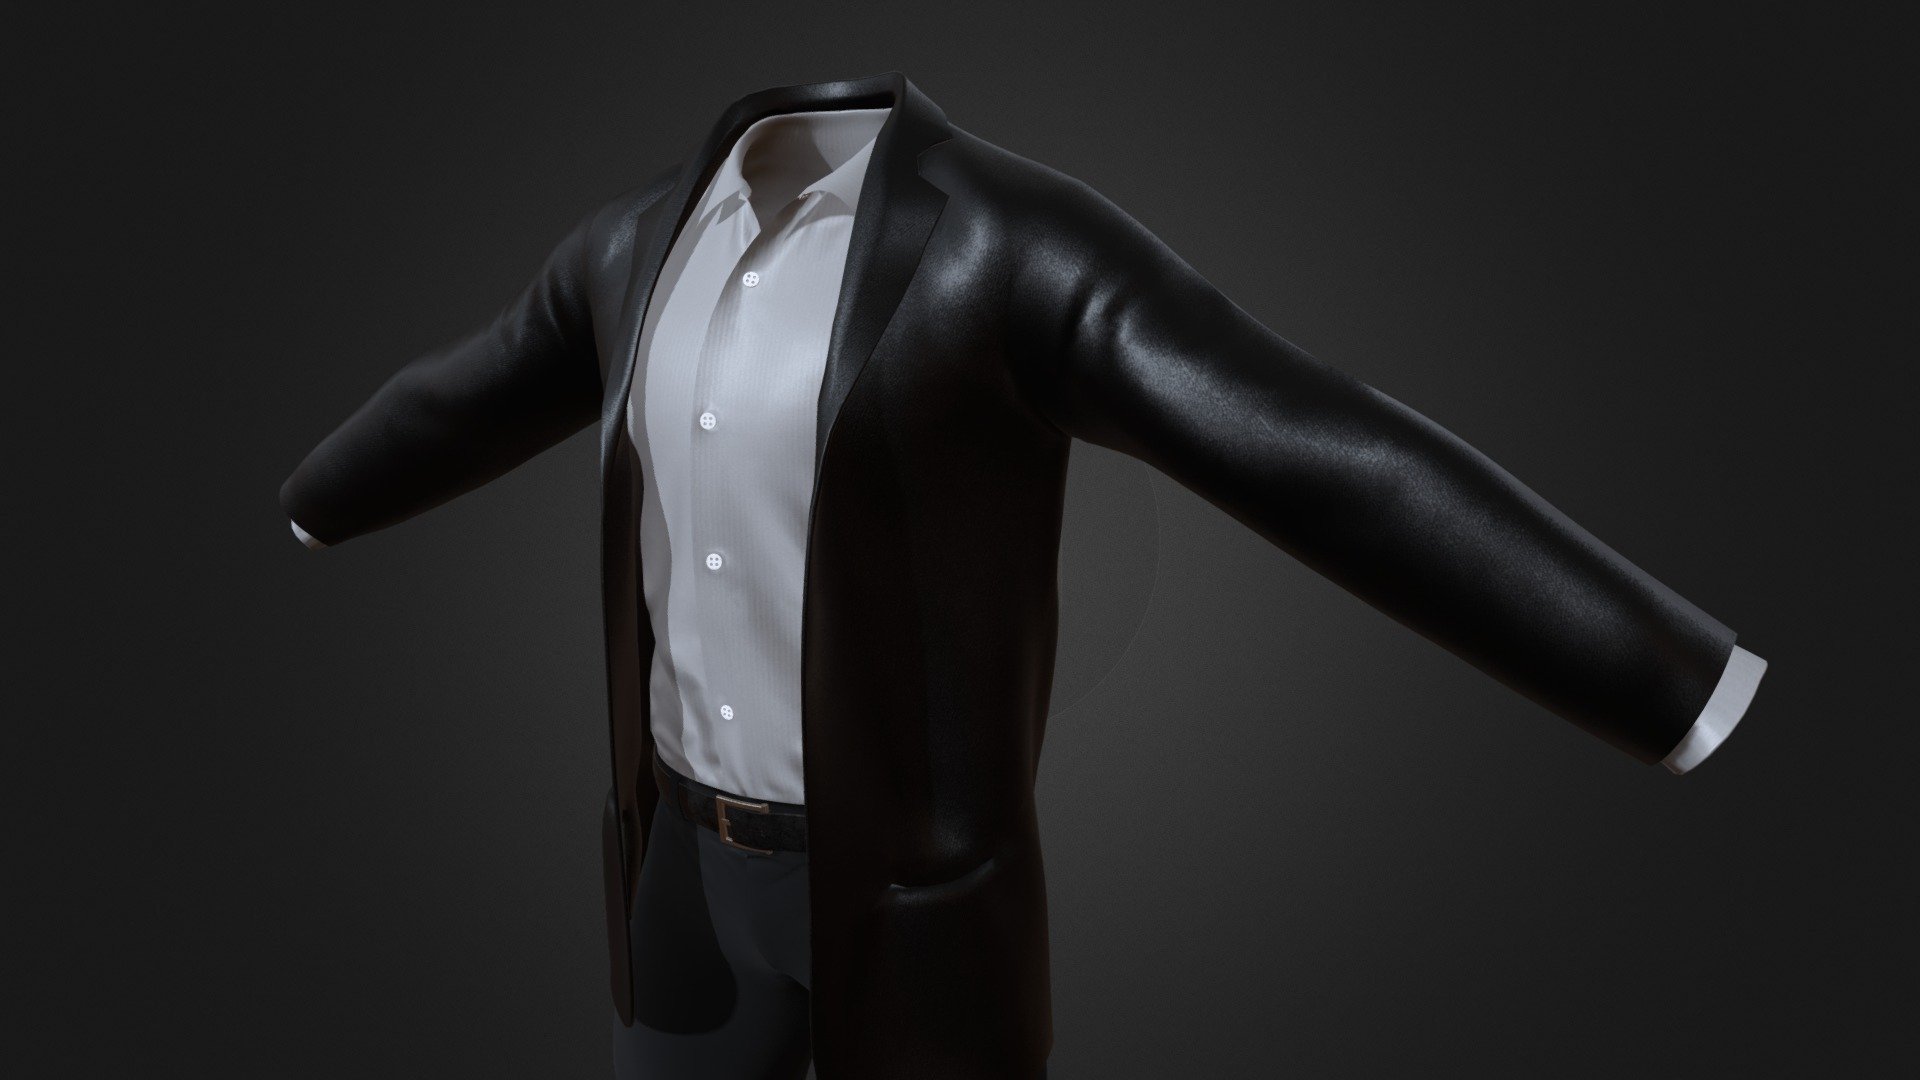 This model contains a Leather Jackt, White Shirt, Leather Belt and Black Tousers.
The Clothing set has PBR Textures/Materials with a 2048x2048 resolution - Leather Jacket Set - Buy Royalty Free 3D model by AARC (@NitroOni) 3d model